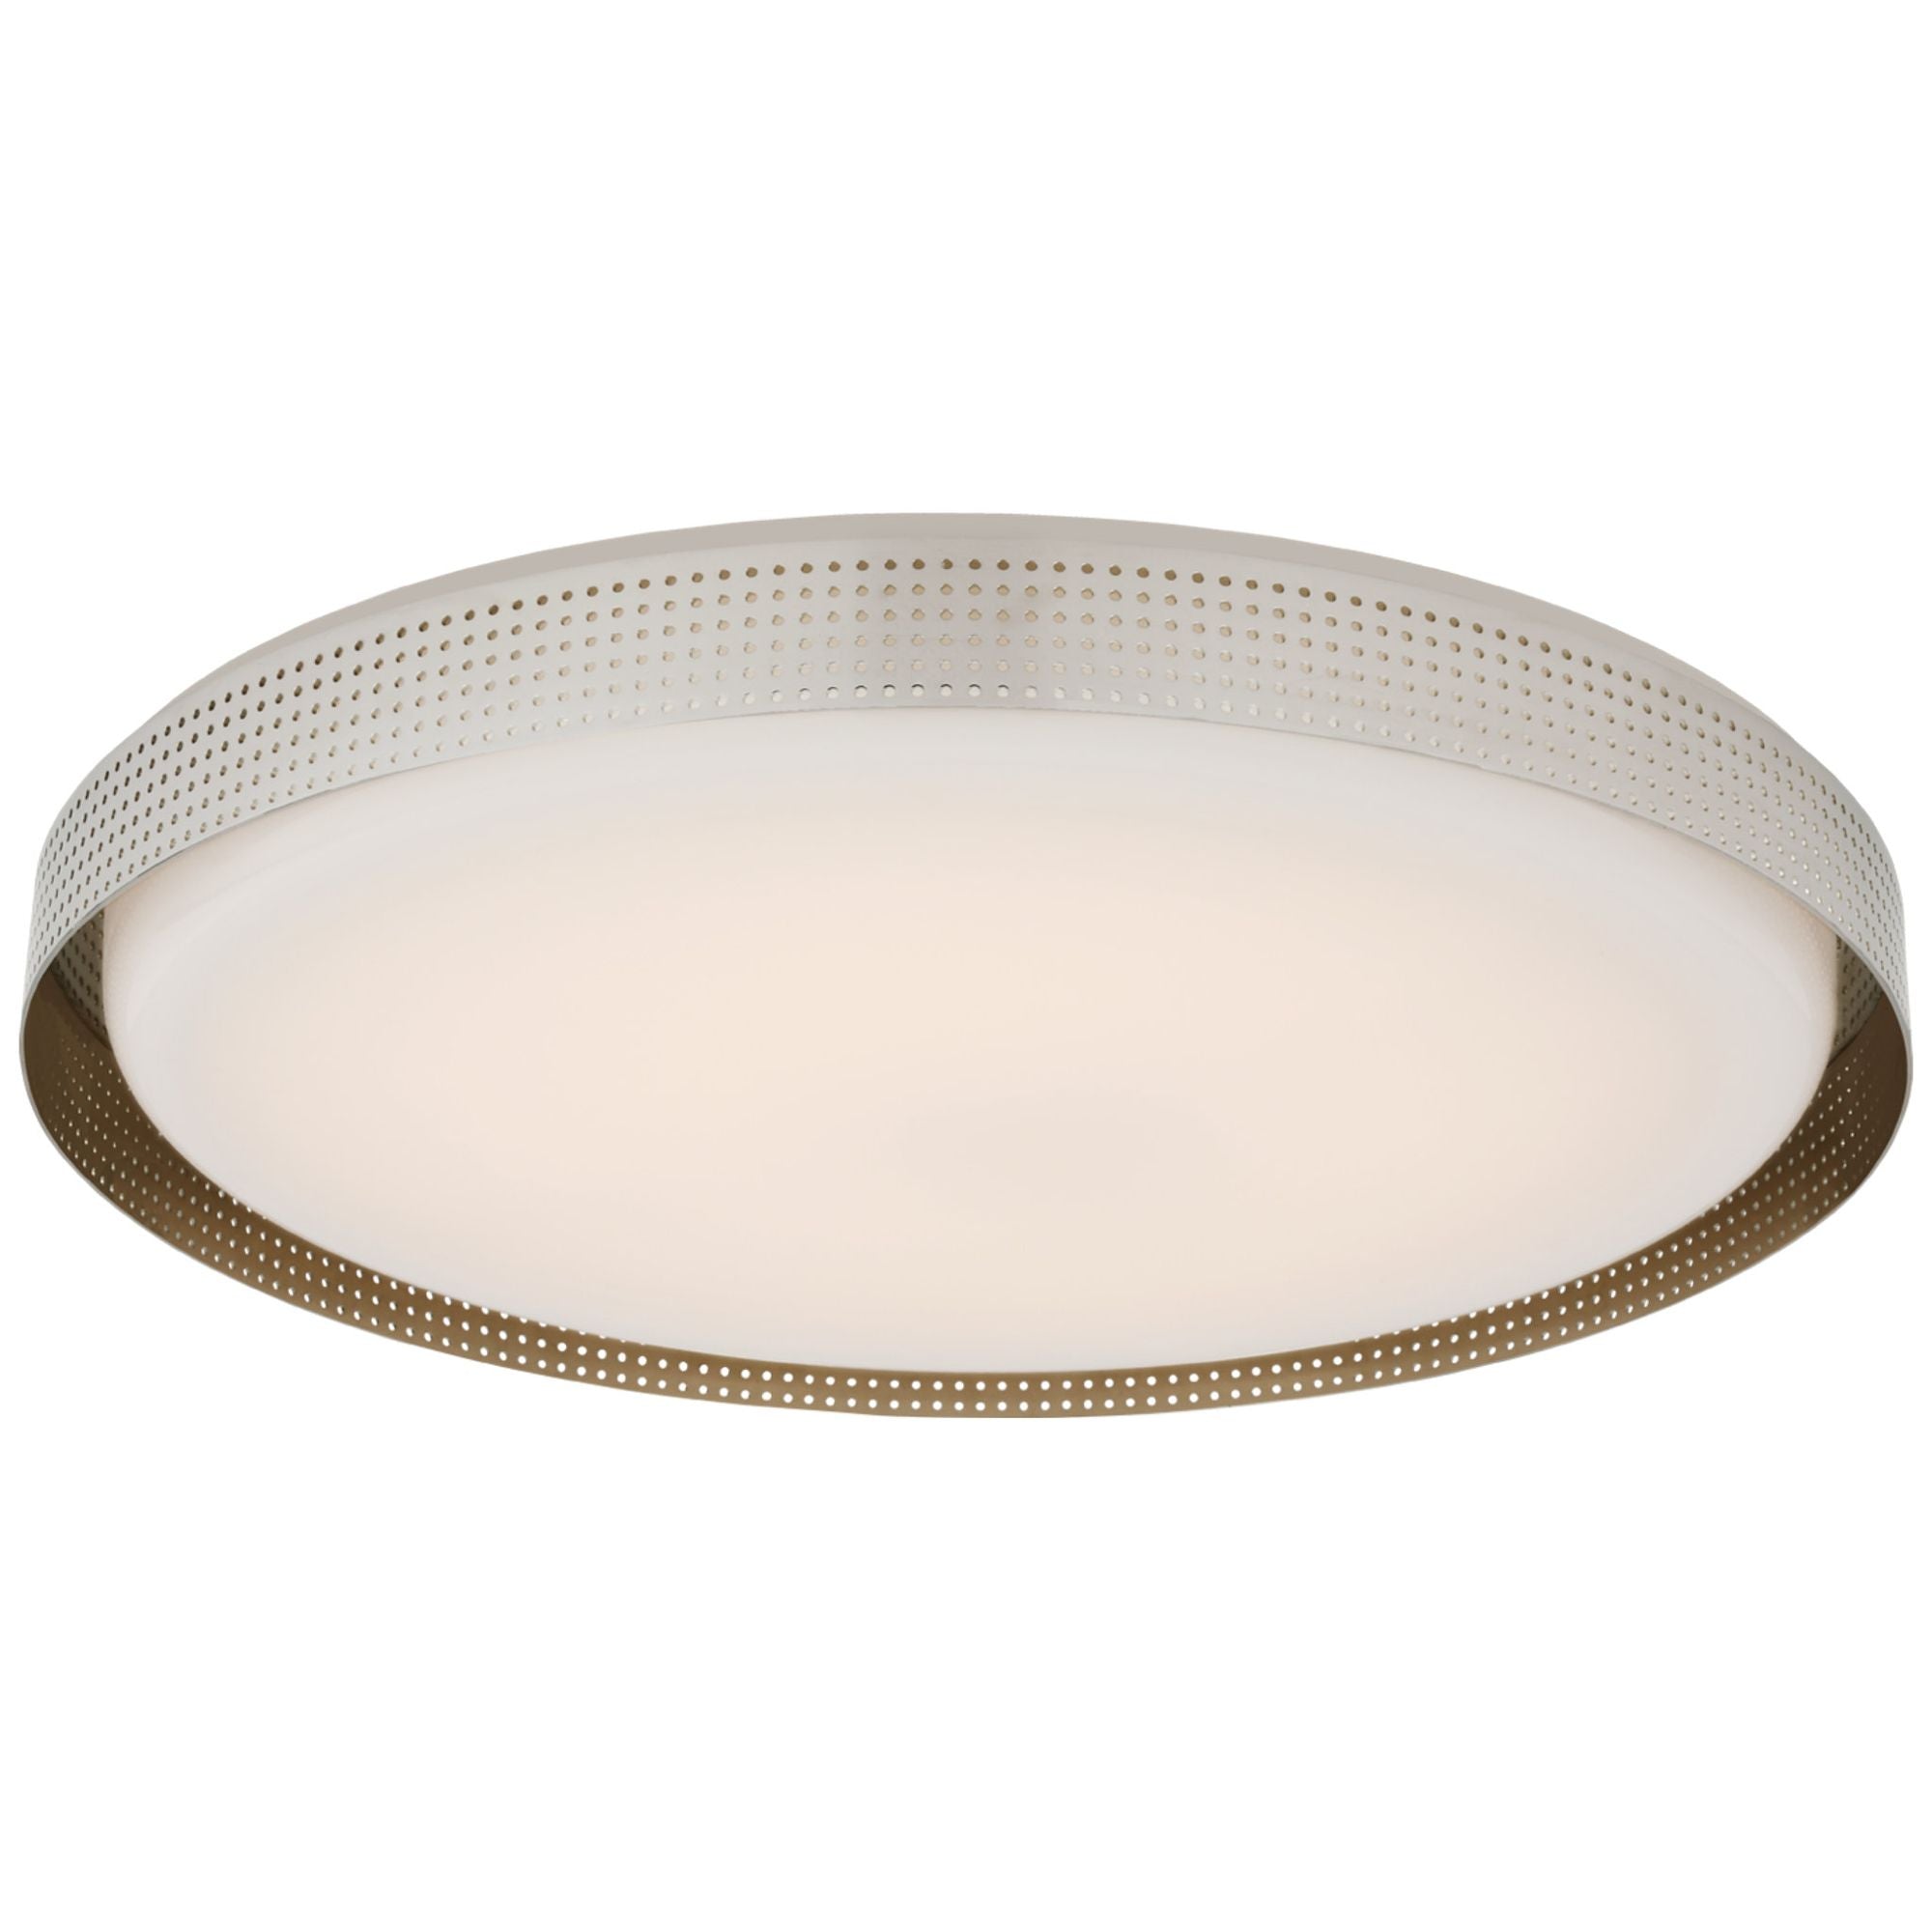 Kelly Wearstler Precision 24" Round Flush Mount in Polished Nickel with White Glass